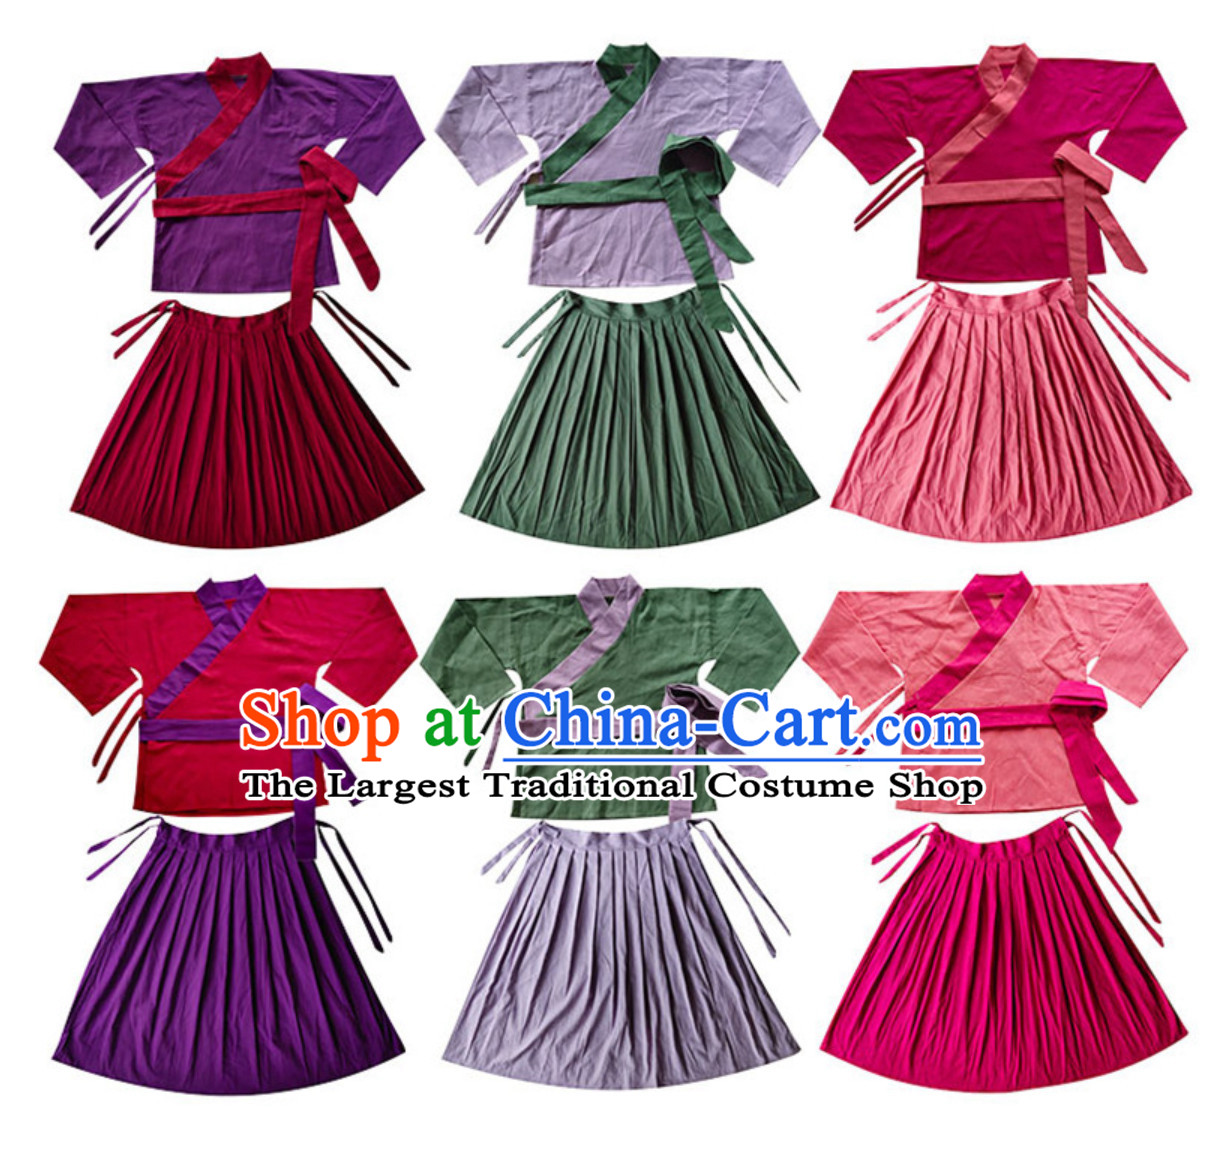 Ancient Chinese Female Servant Costumes Poor People Clothes Costume Farmer Costumes Chinese Civilian Costumes for Women